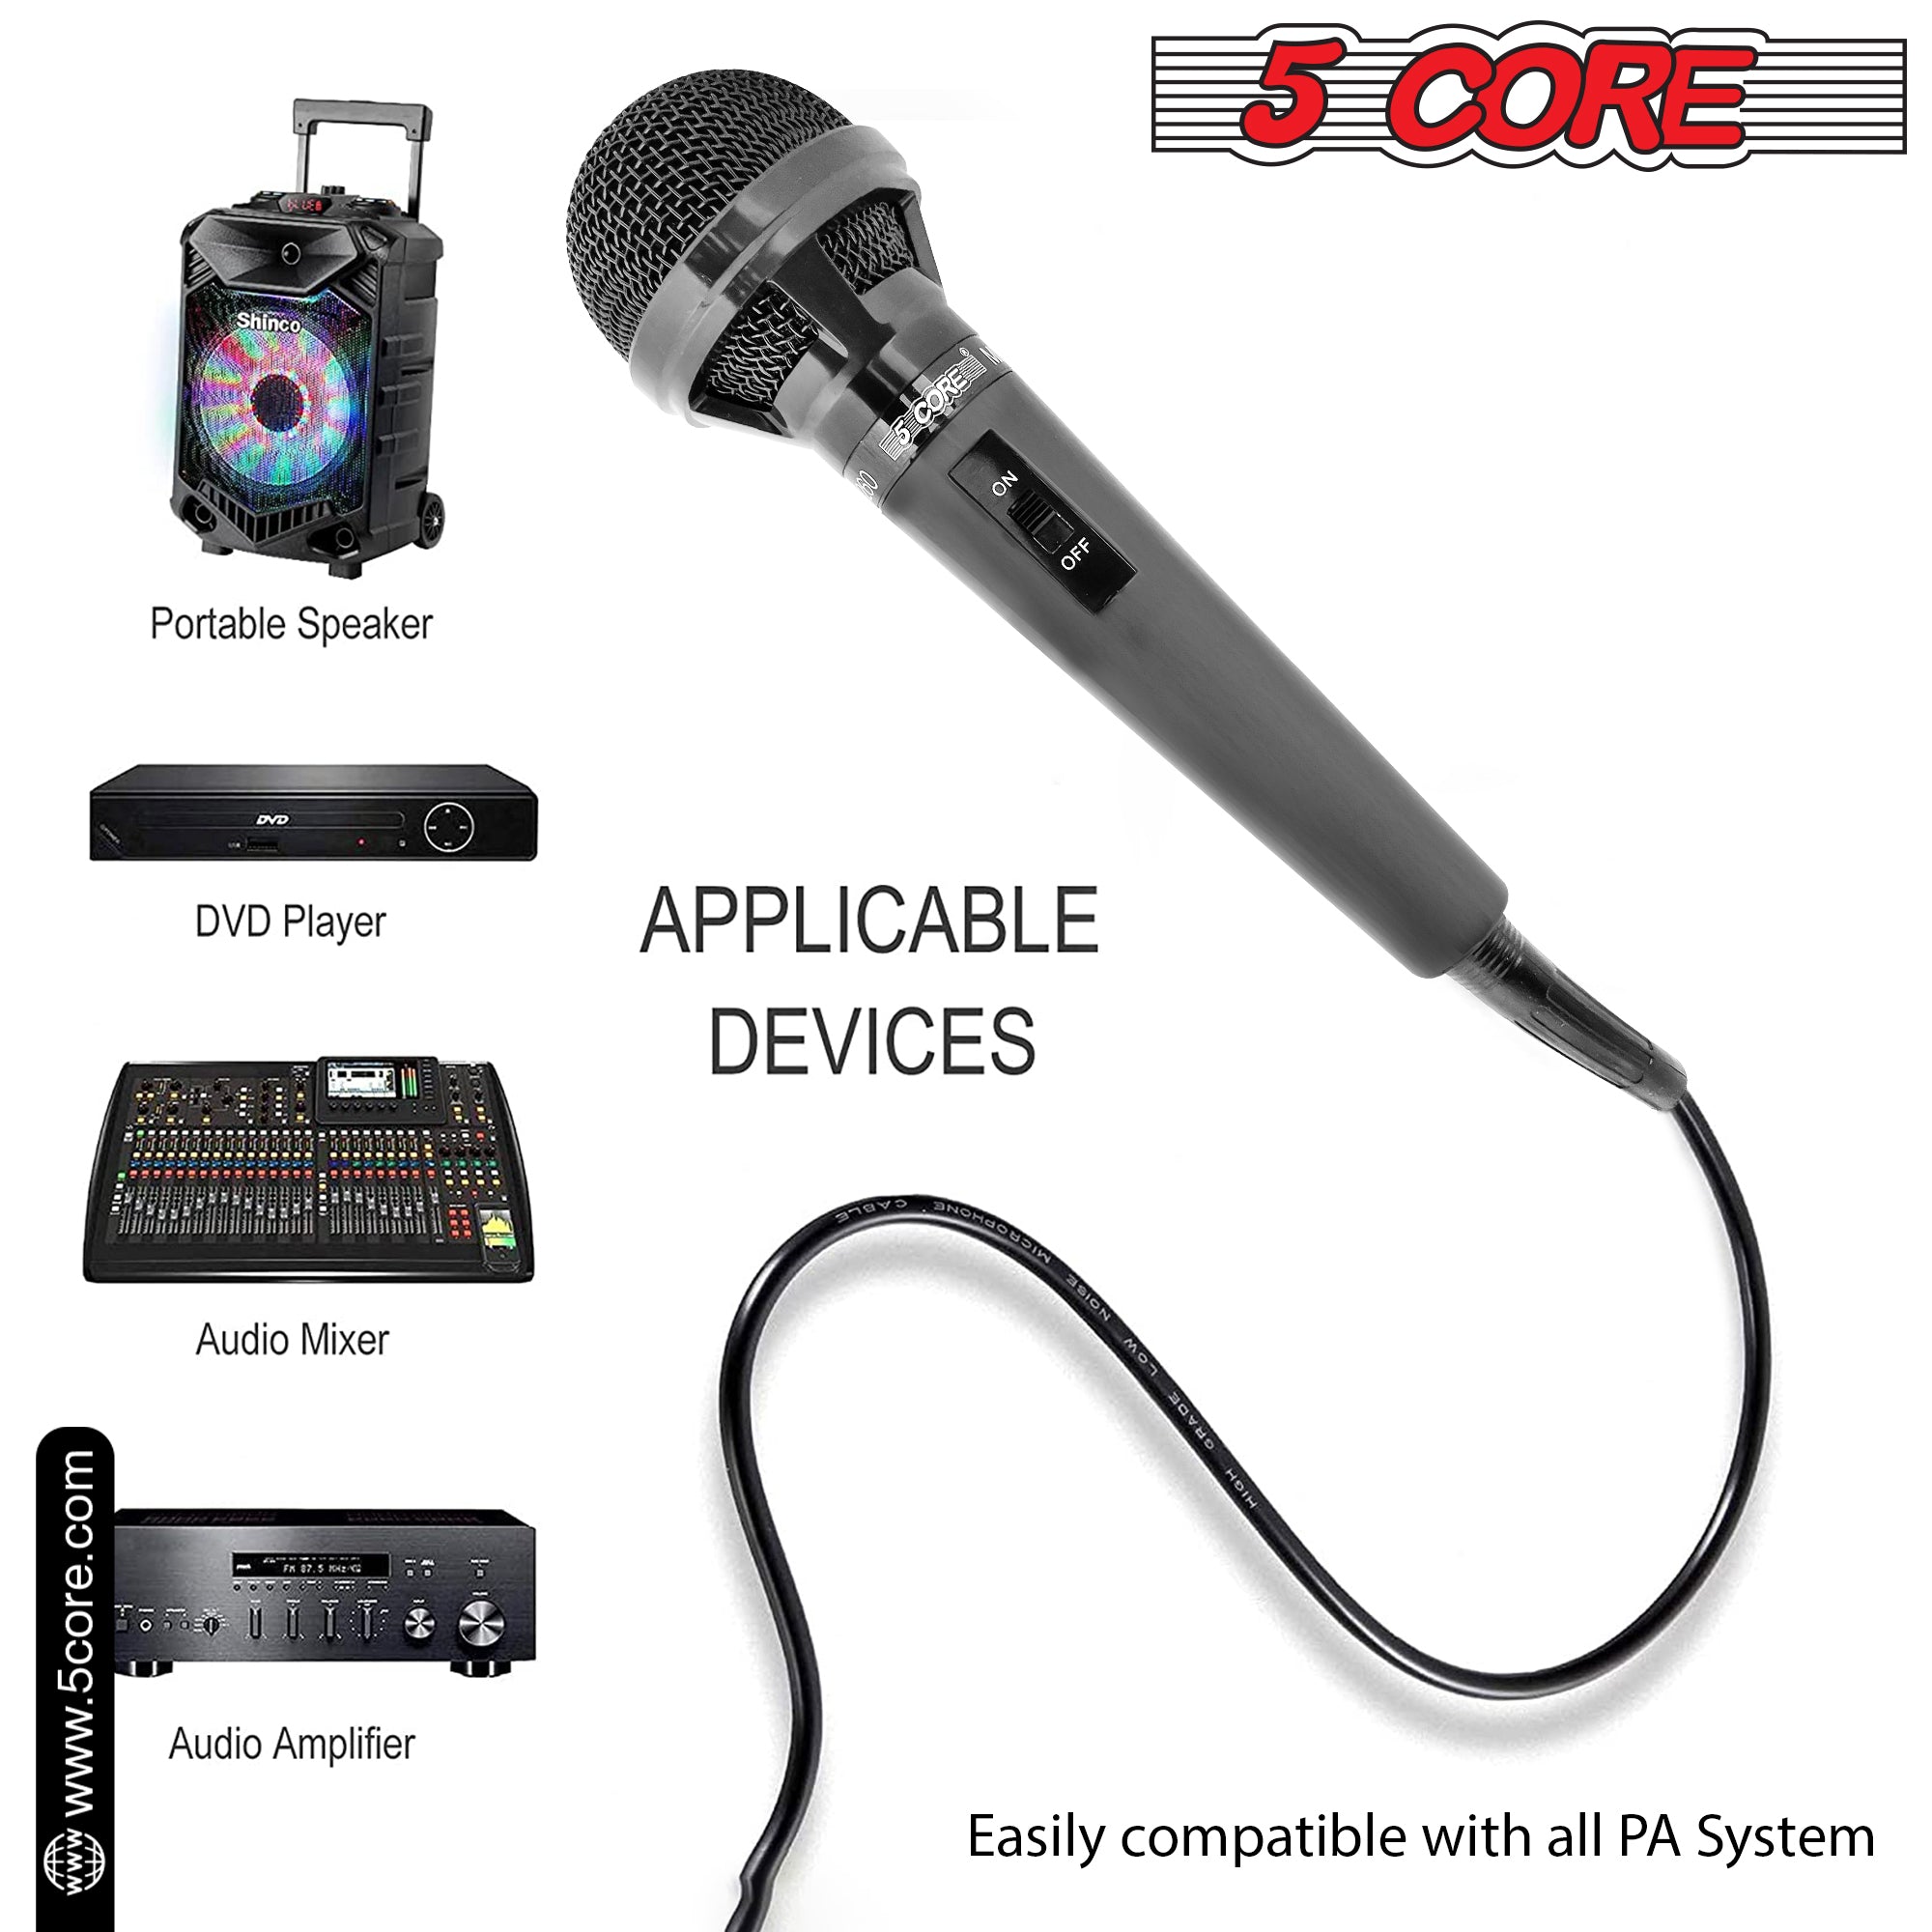 Perfect for Events: Professional Grade Microphone for Live Performances